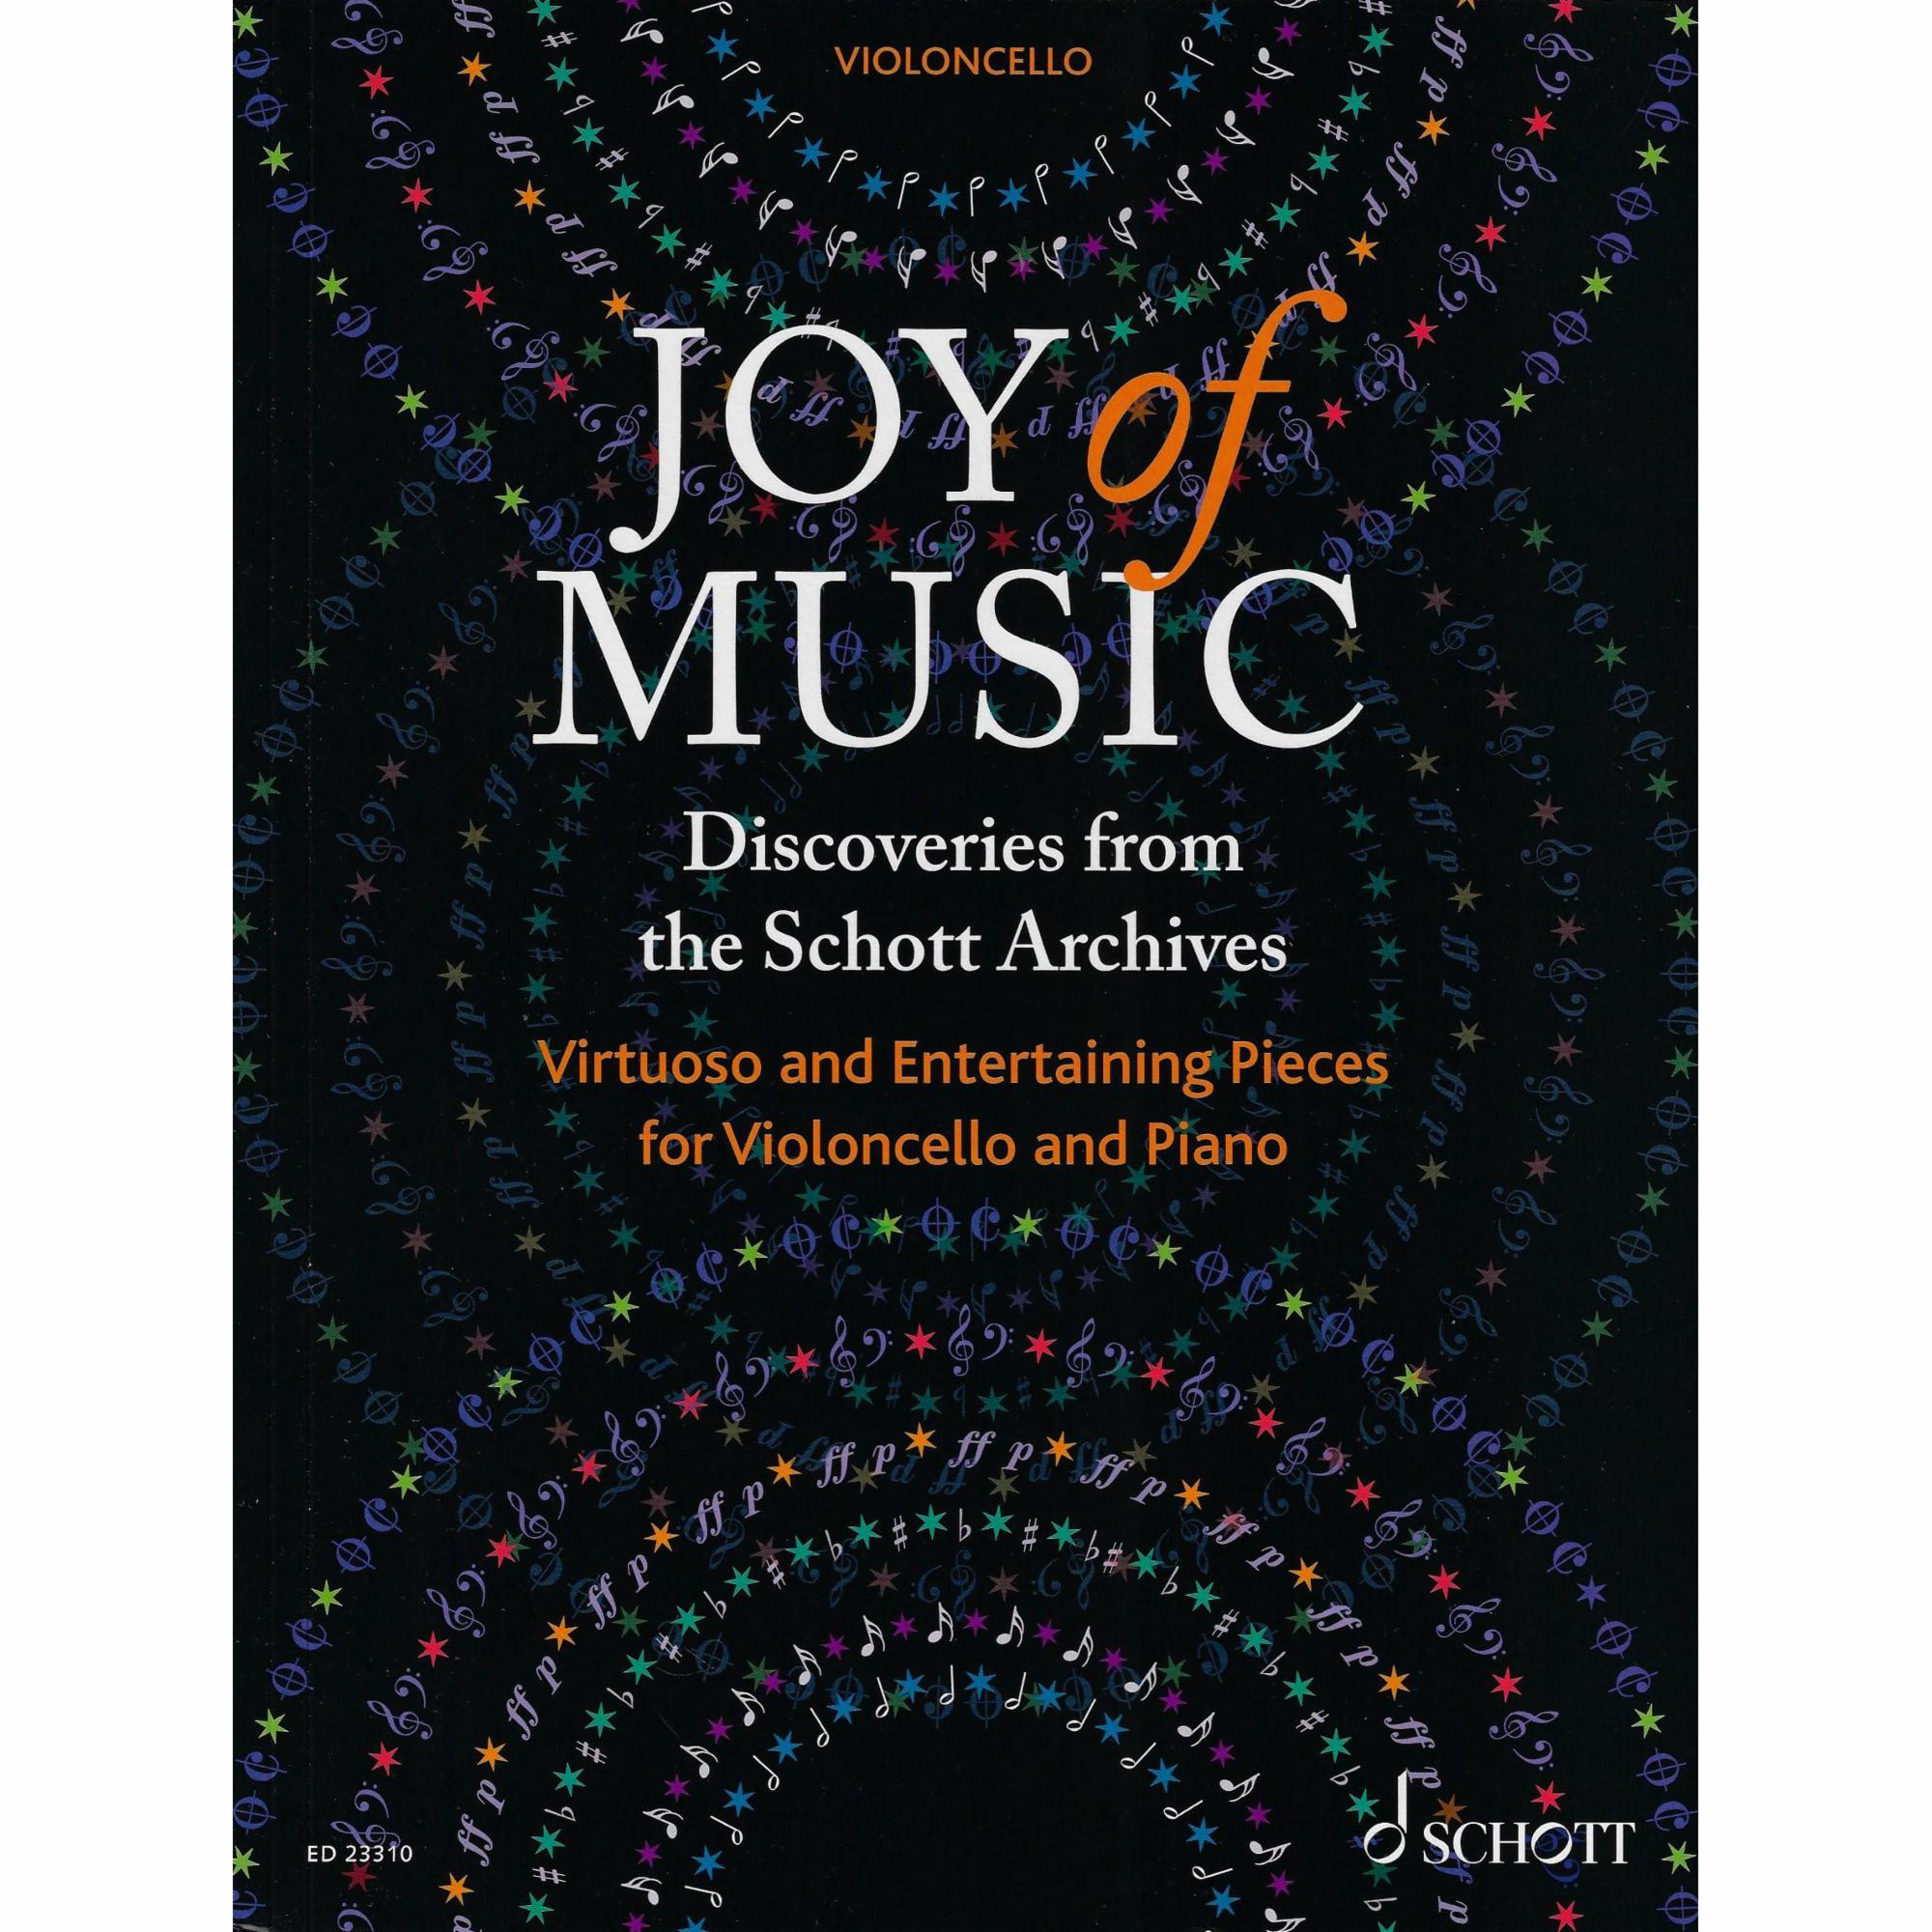 Joy of Music: Virtuoso and Entertaining Pieces for Cello and Piano